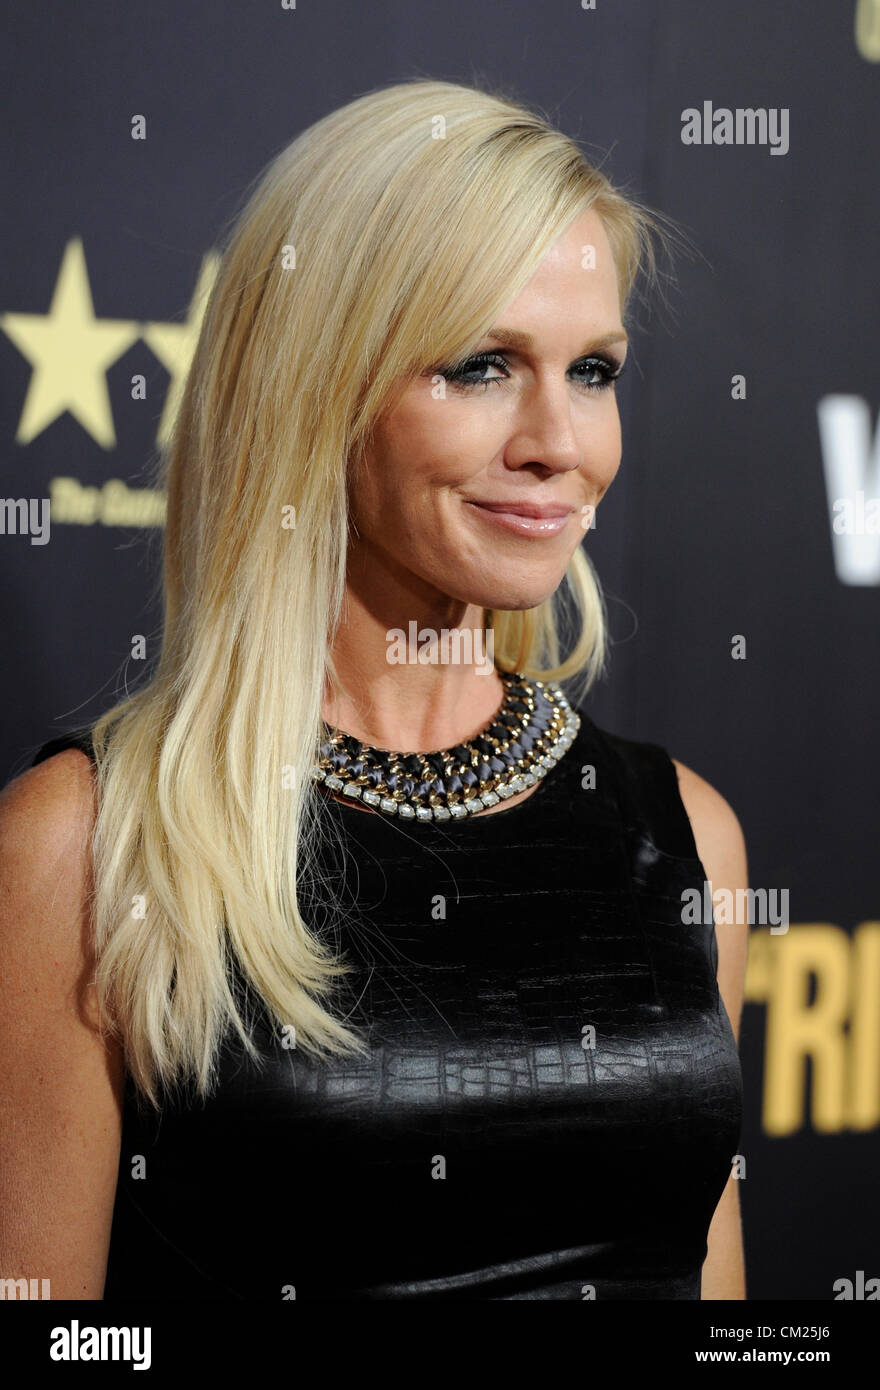 Los Angeles, CA, USA Sept 17th 2012. Jennie Garth at the End of Watch film premiere Photo Credit:  Sydney Alford / ALAMY live news. Stock Photo